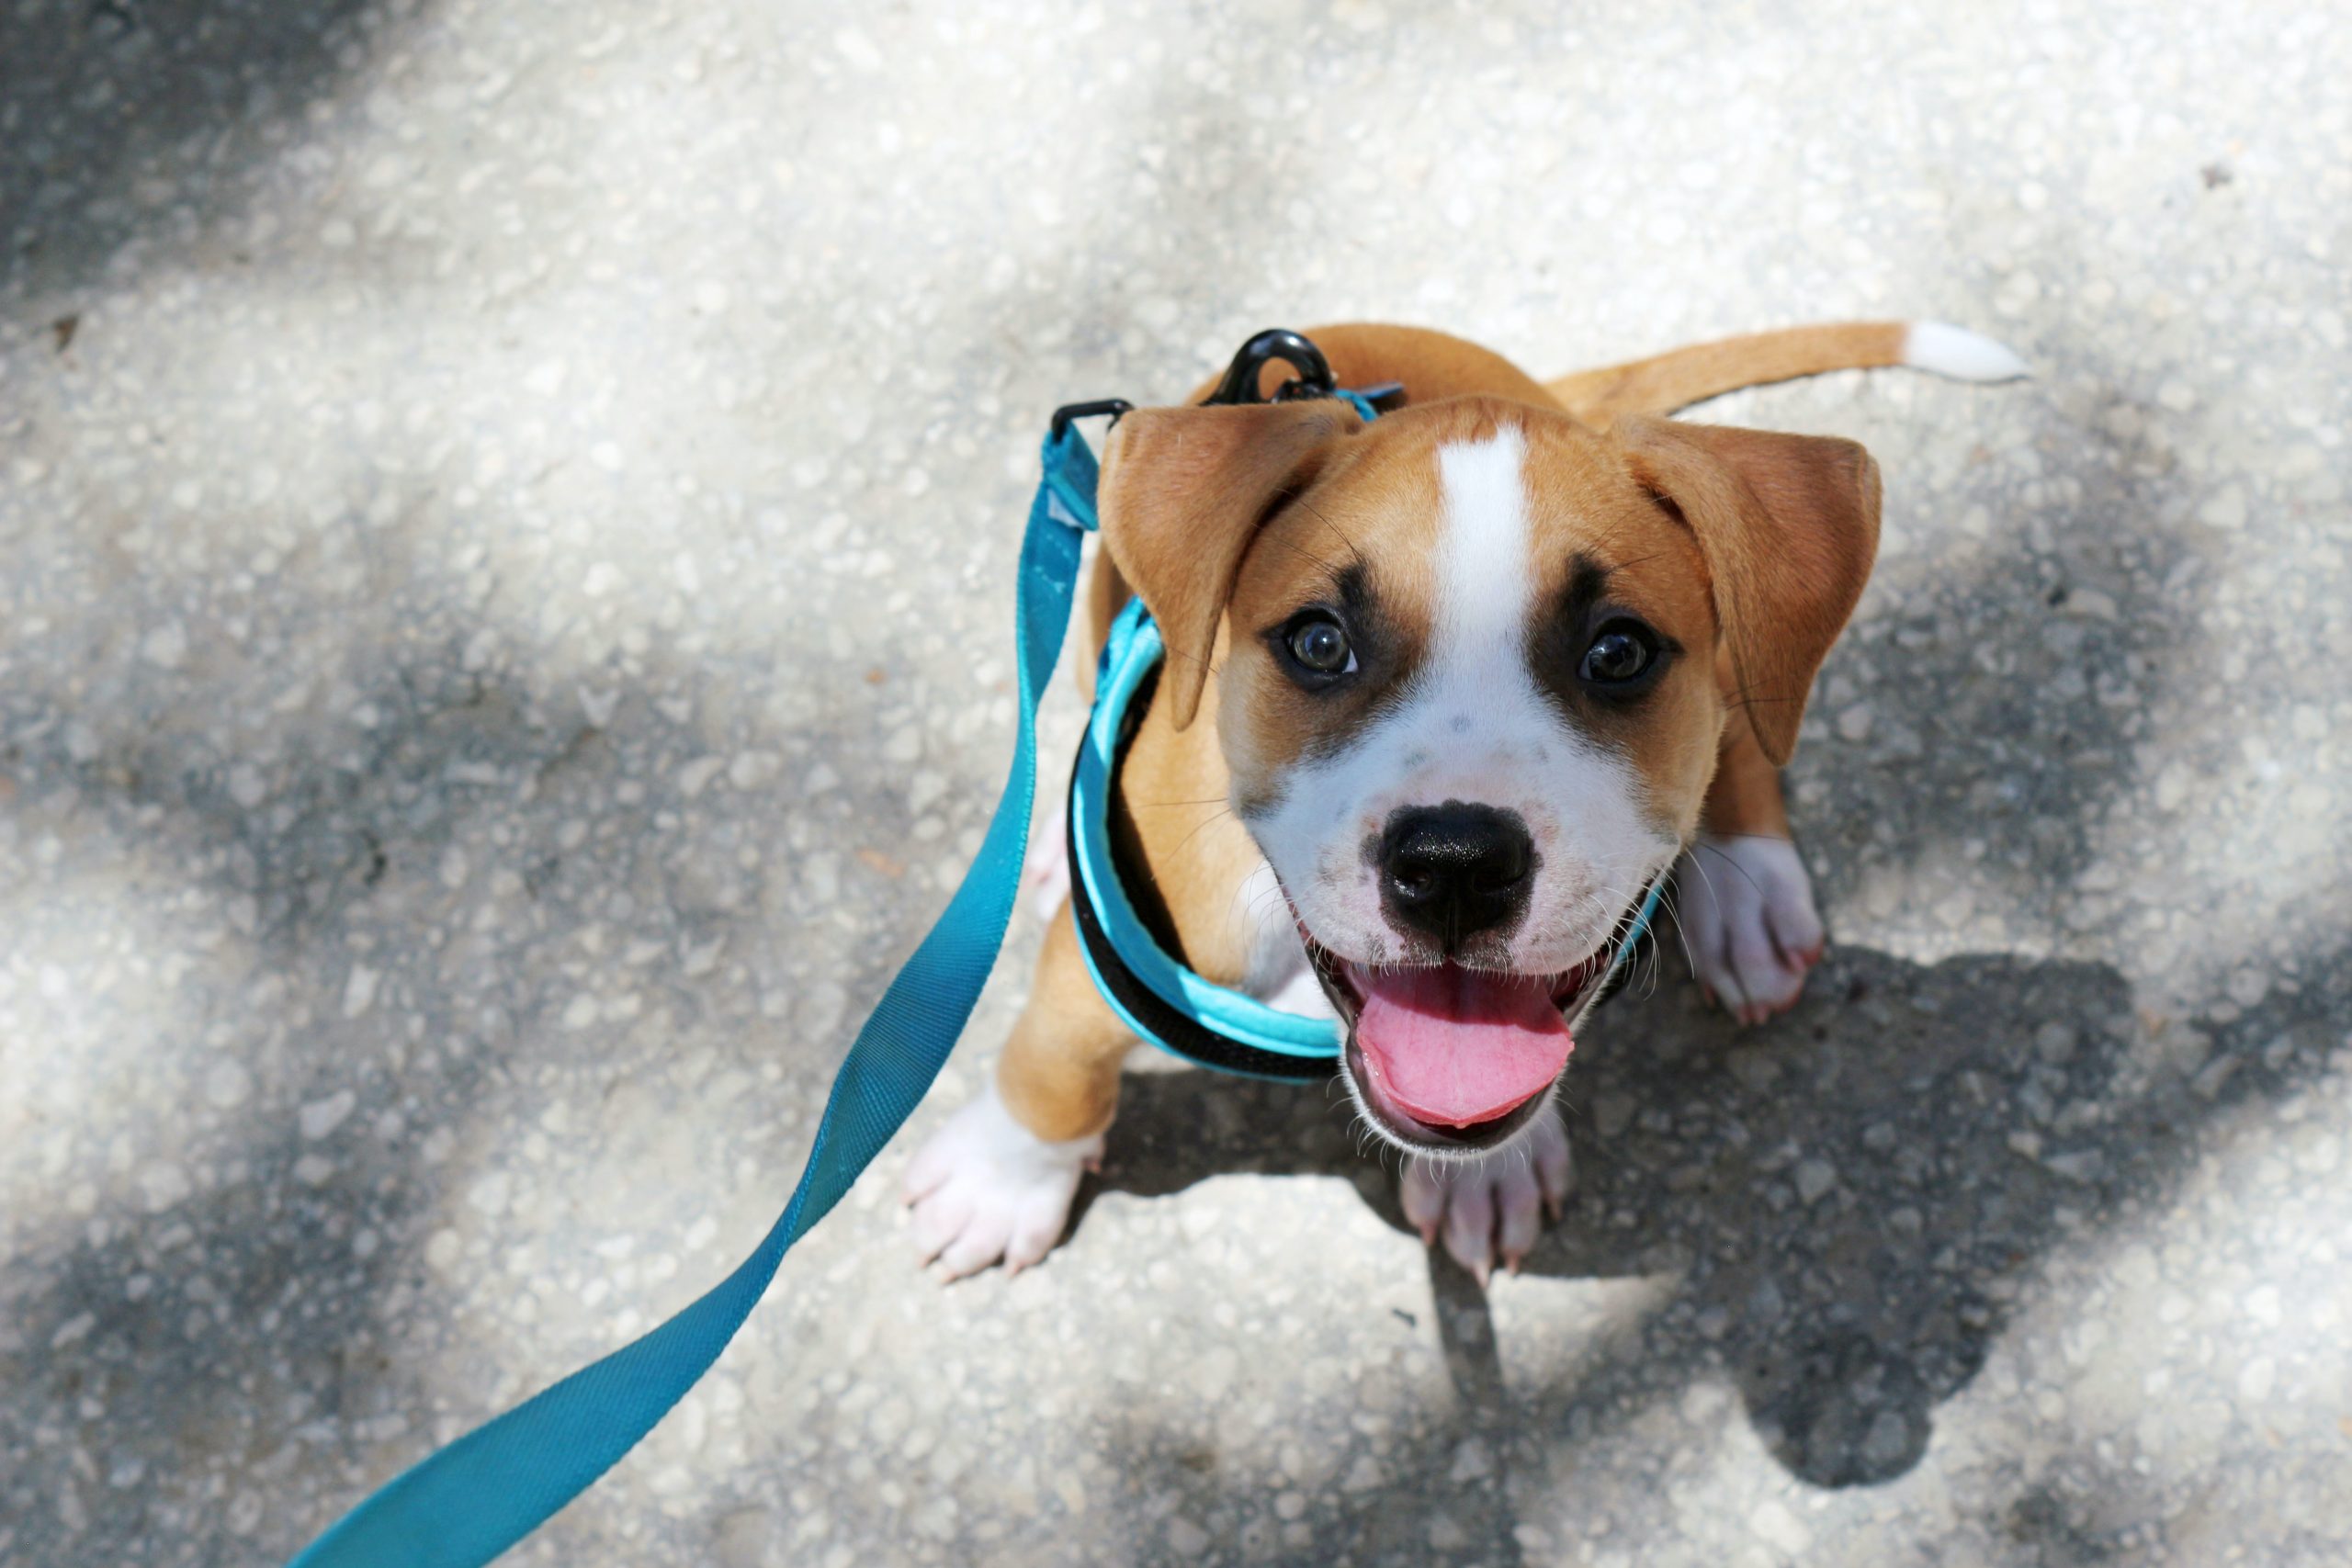 Leash Training Tips for Your Dog